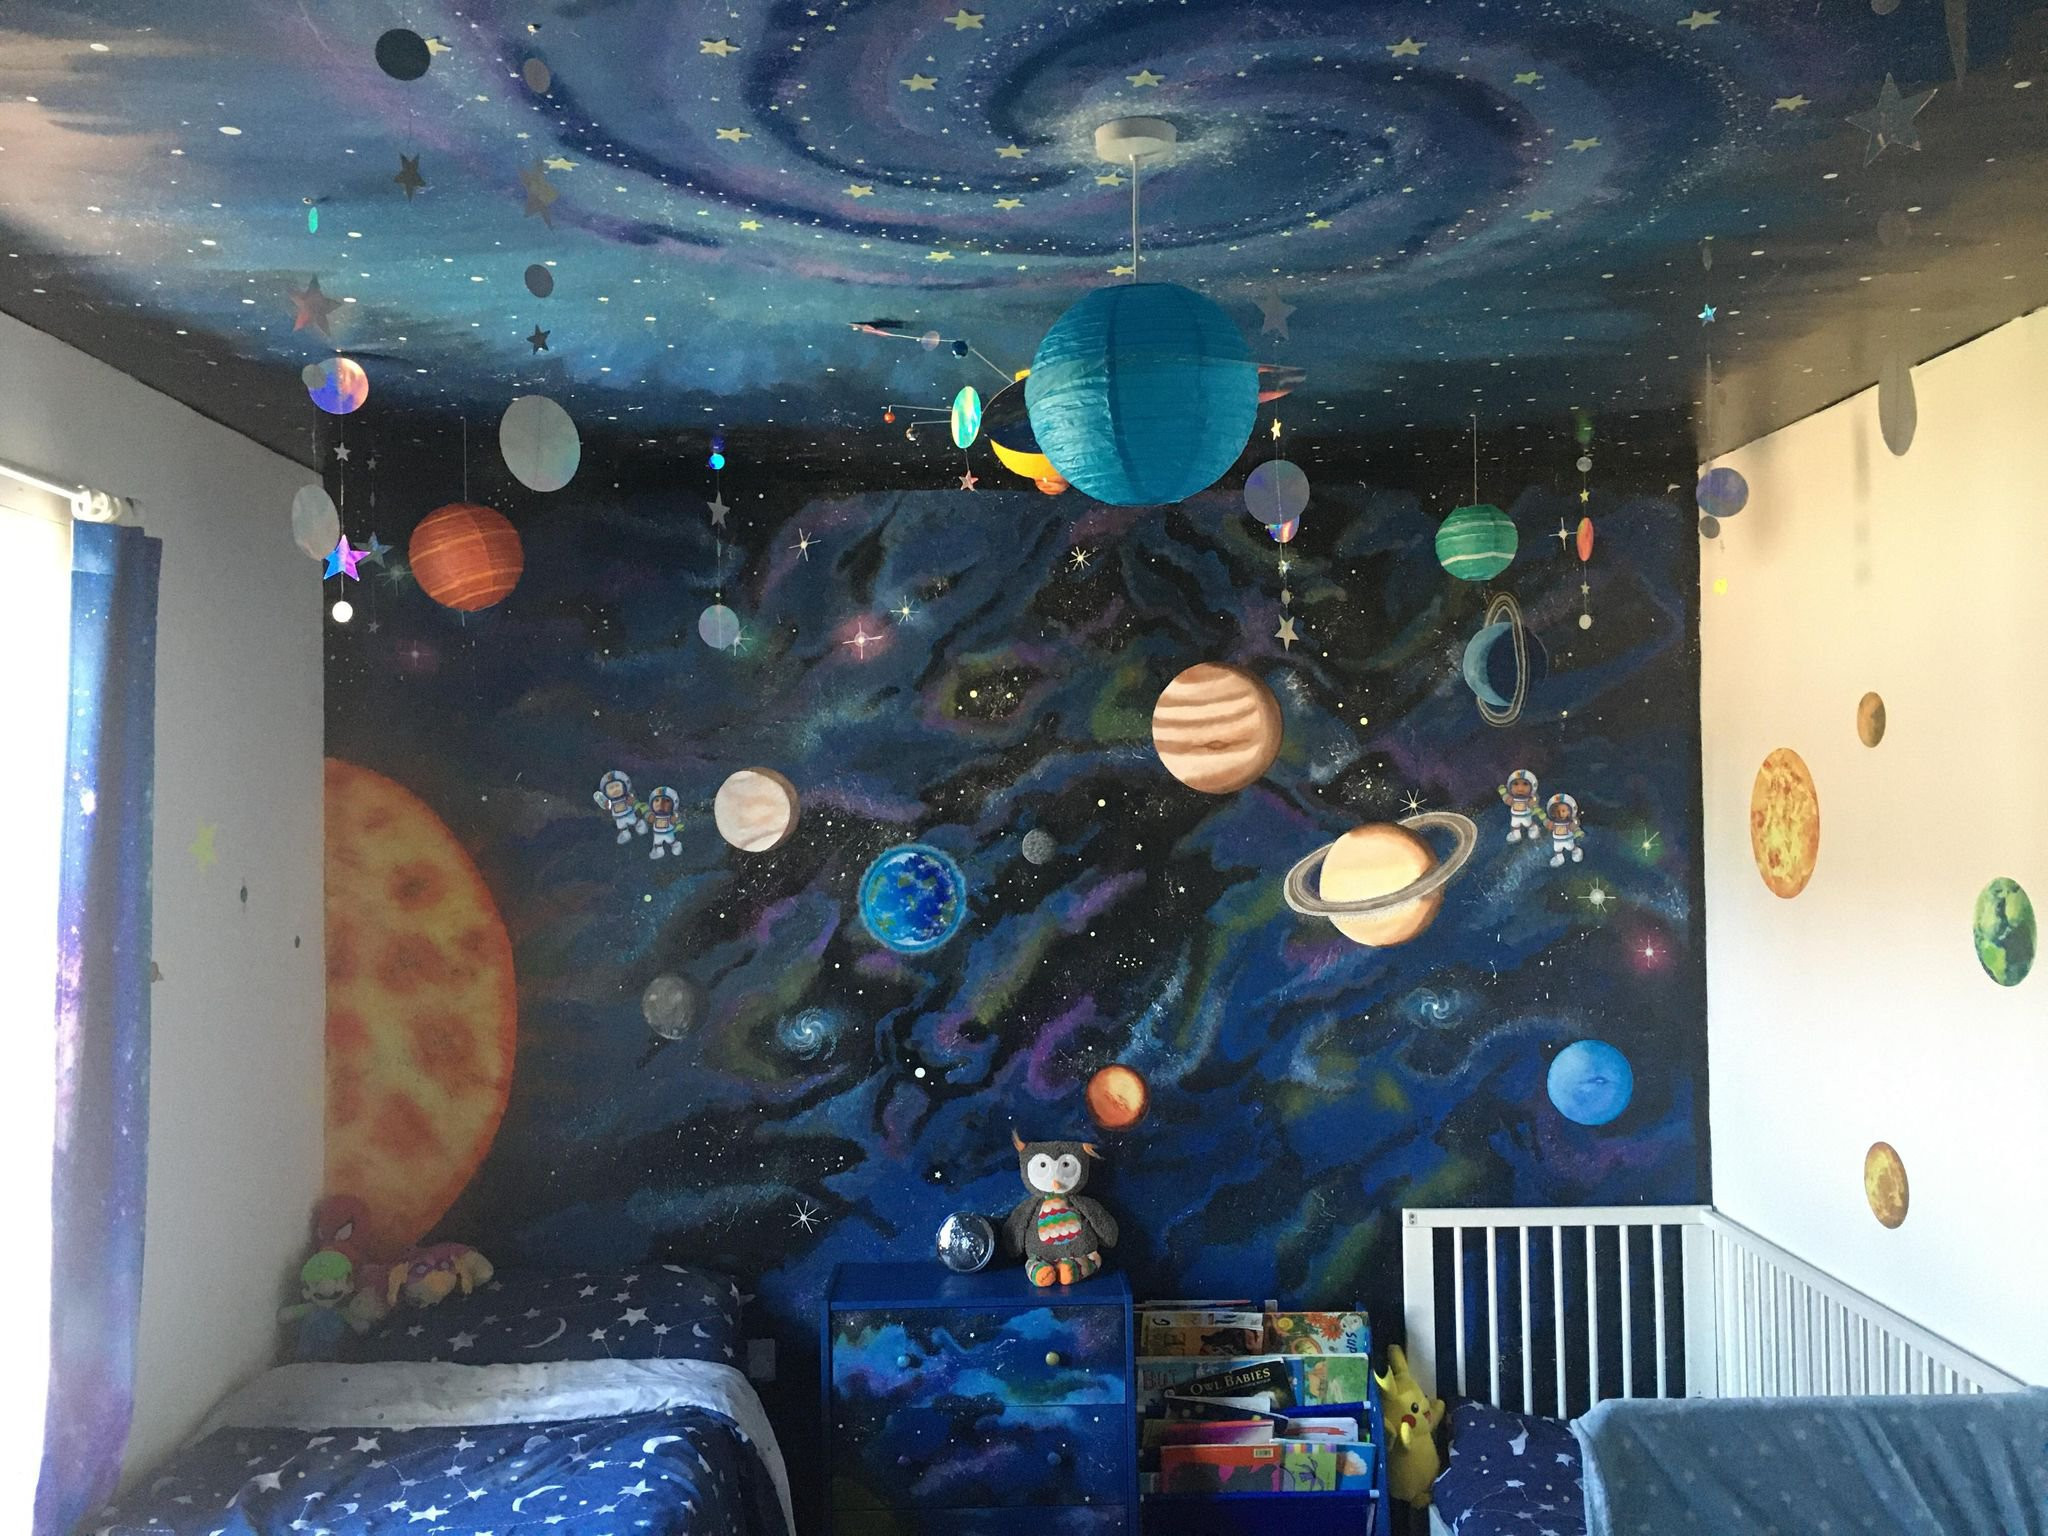 Mum creates amazing space room for just £68 using household items